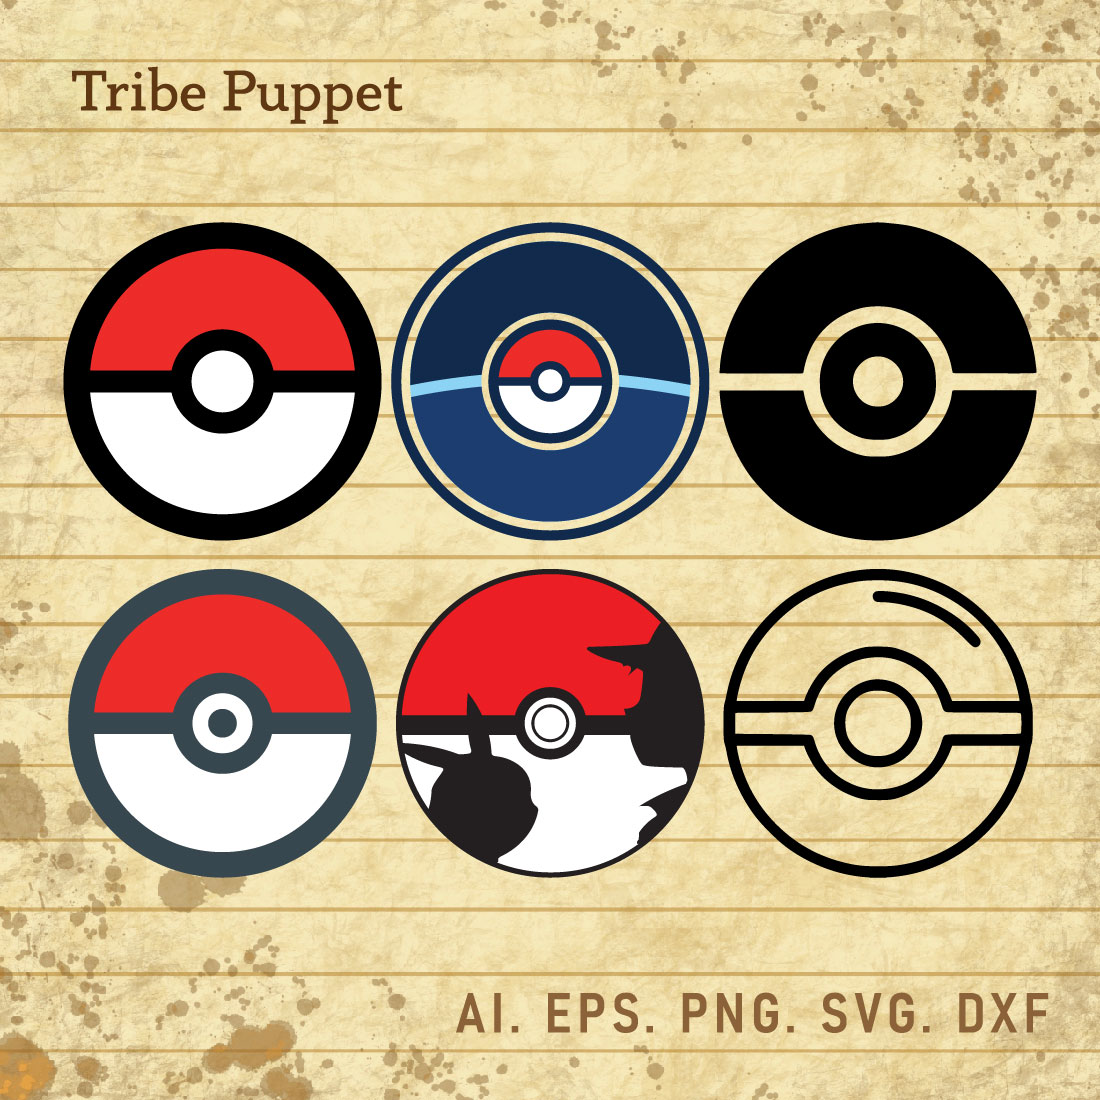 Poke ball on a white background Royalty Free Vector Image